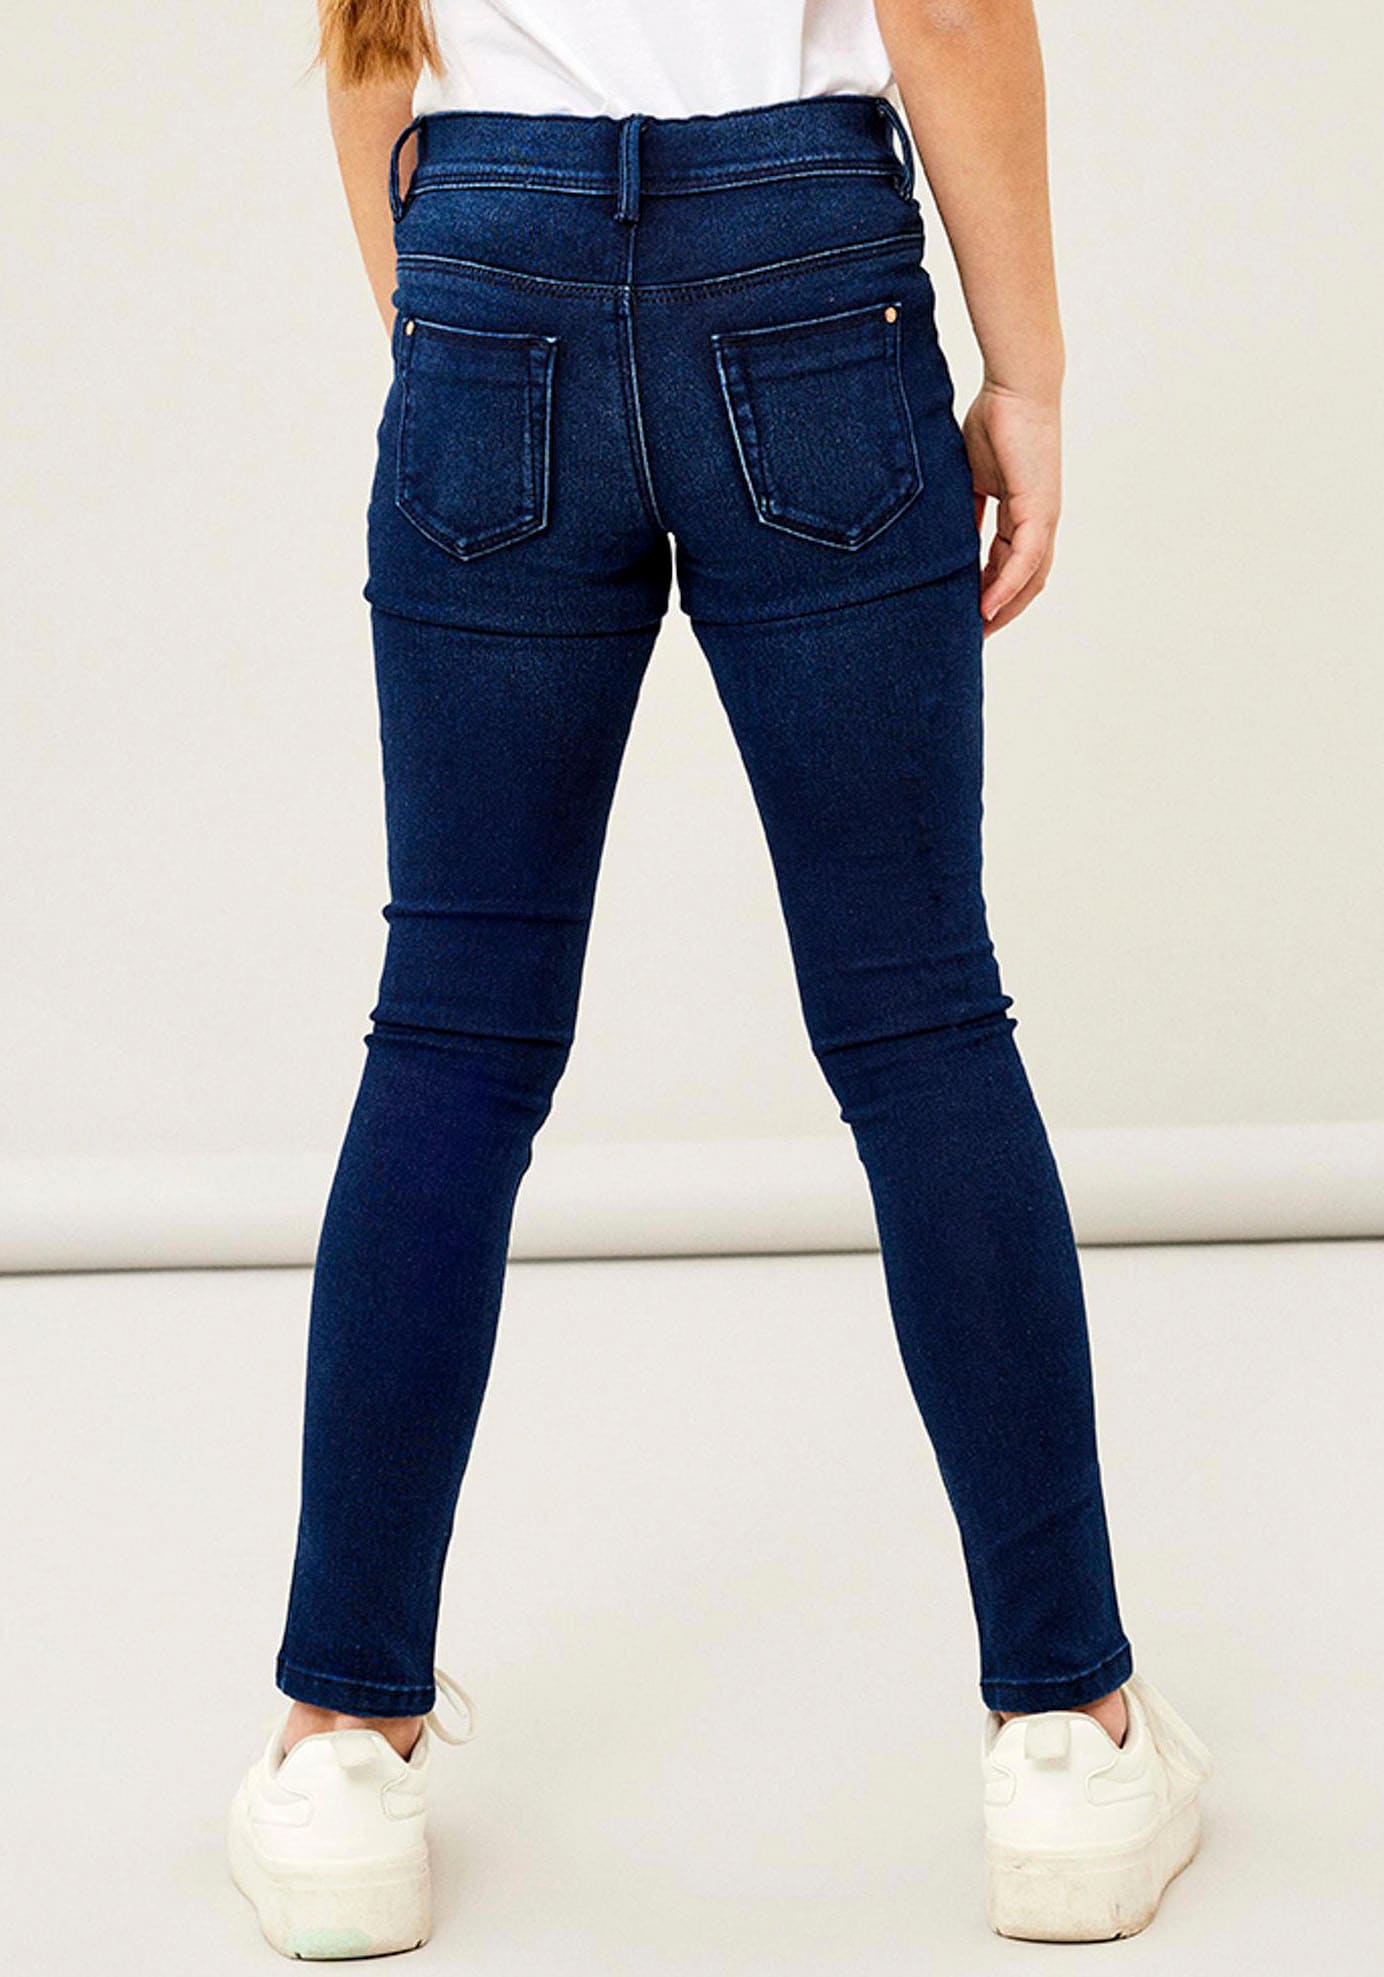 PANT« It »NKFPOLLY DNMTAX bestellen Name Stretch-Jeans